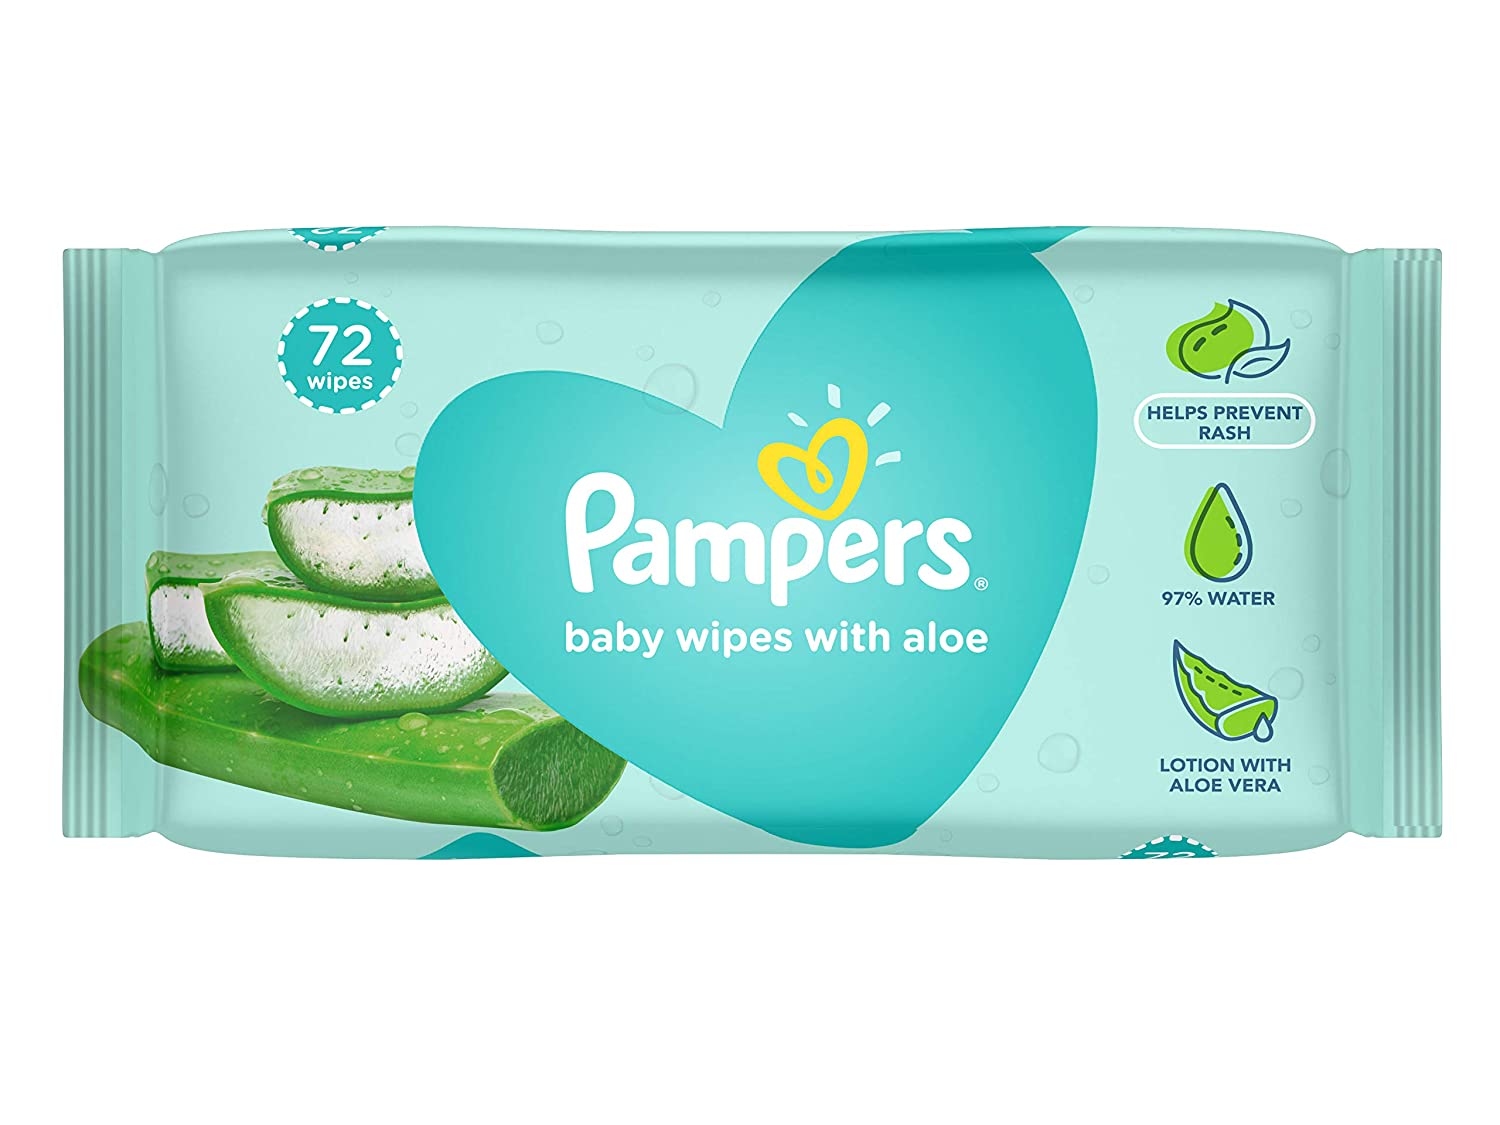 Buy Pampers Aloe Baby Wipes, 72 Count Online